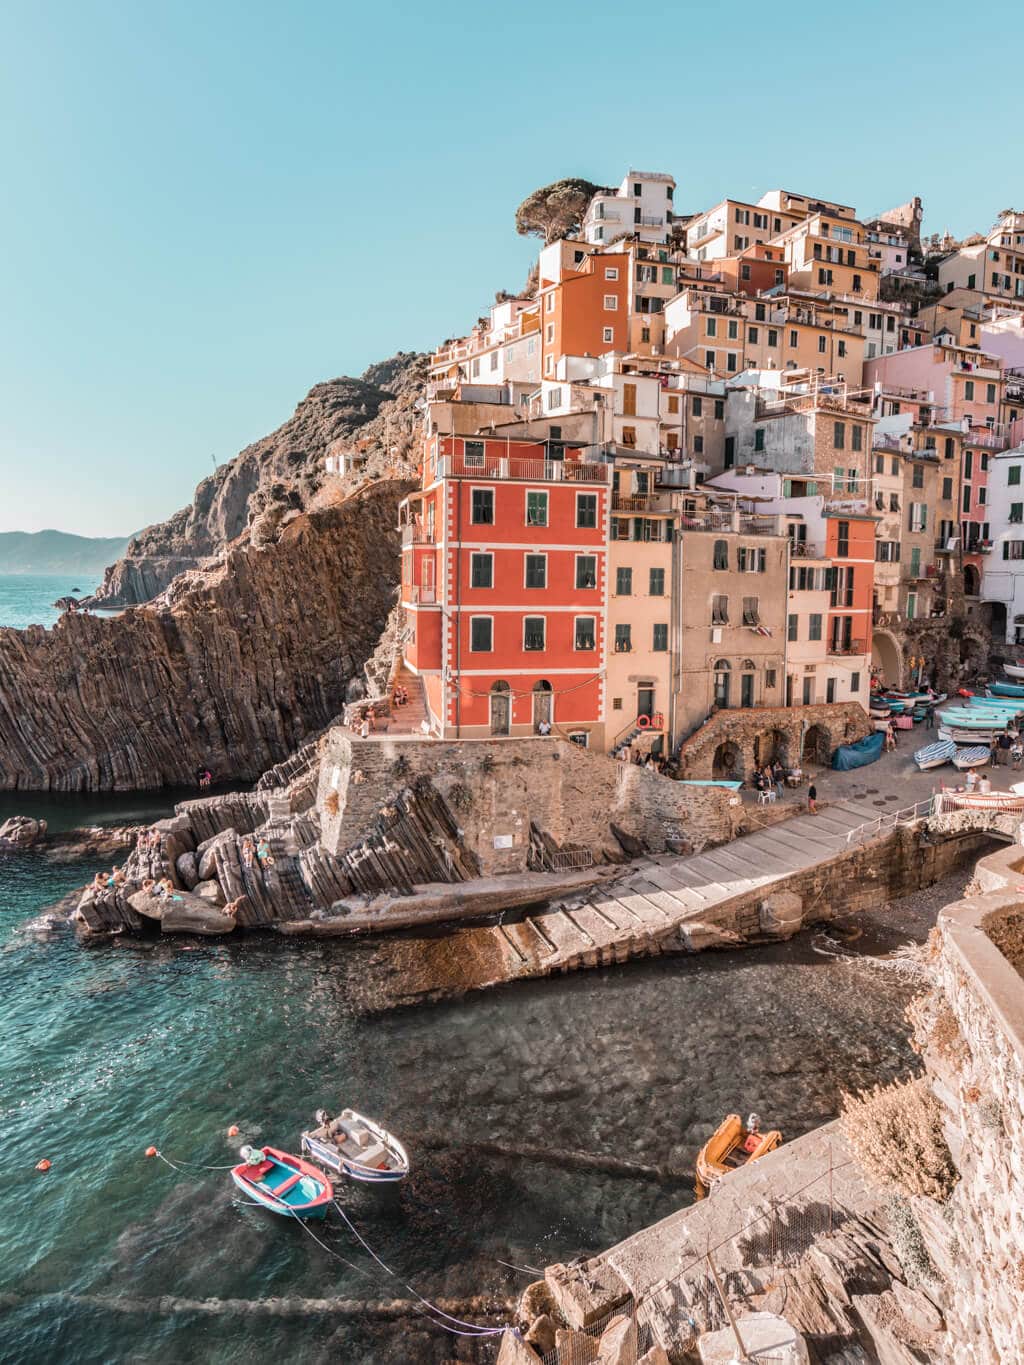 A Guide For Planning A Trip To Italy - plan your trip like a pro with my tips for the top destinations